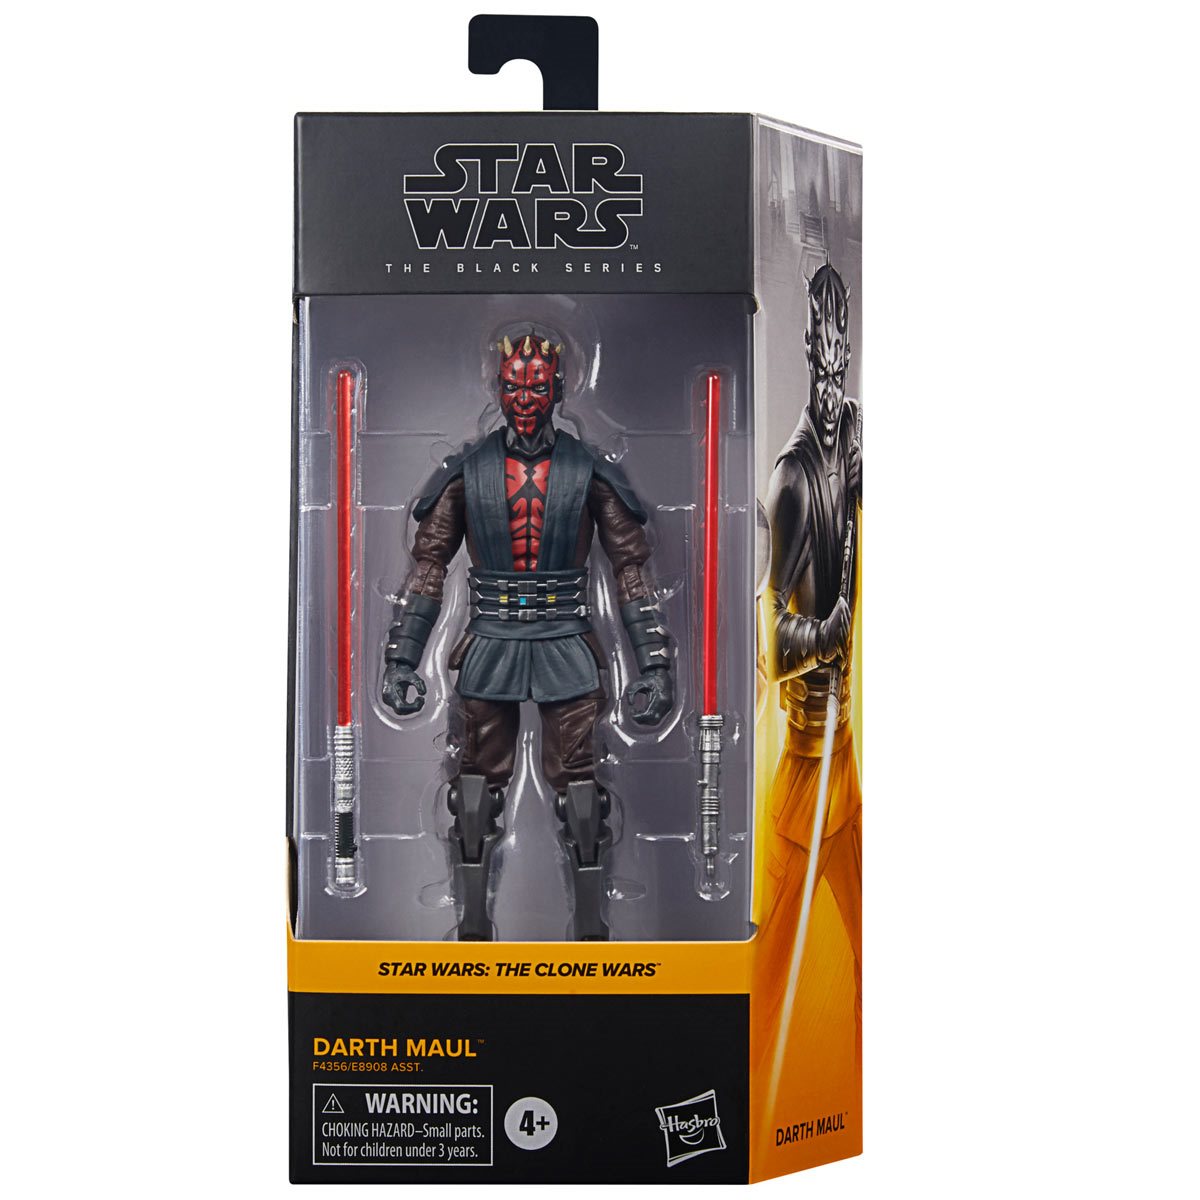 Hasbro Star Wars The Black Series Darth Maul Action Figure for sale online 